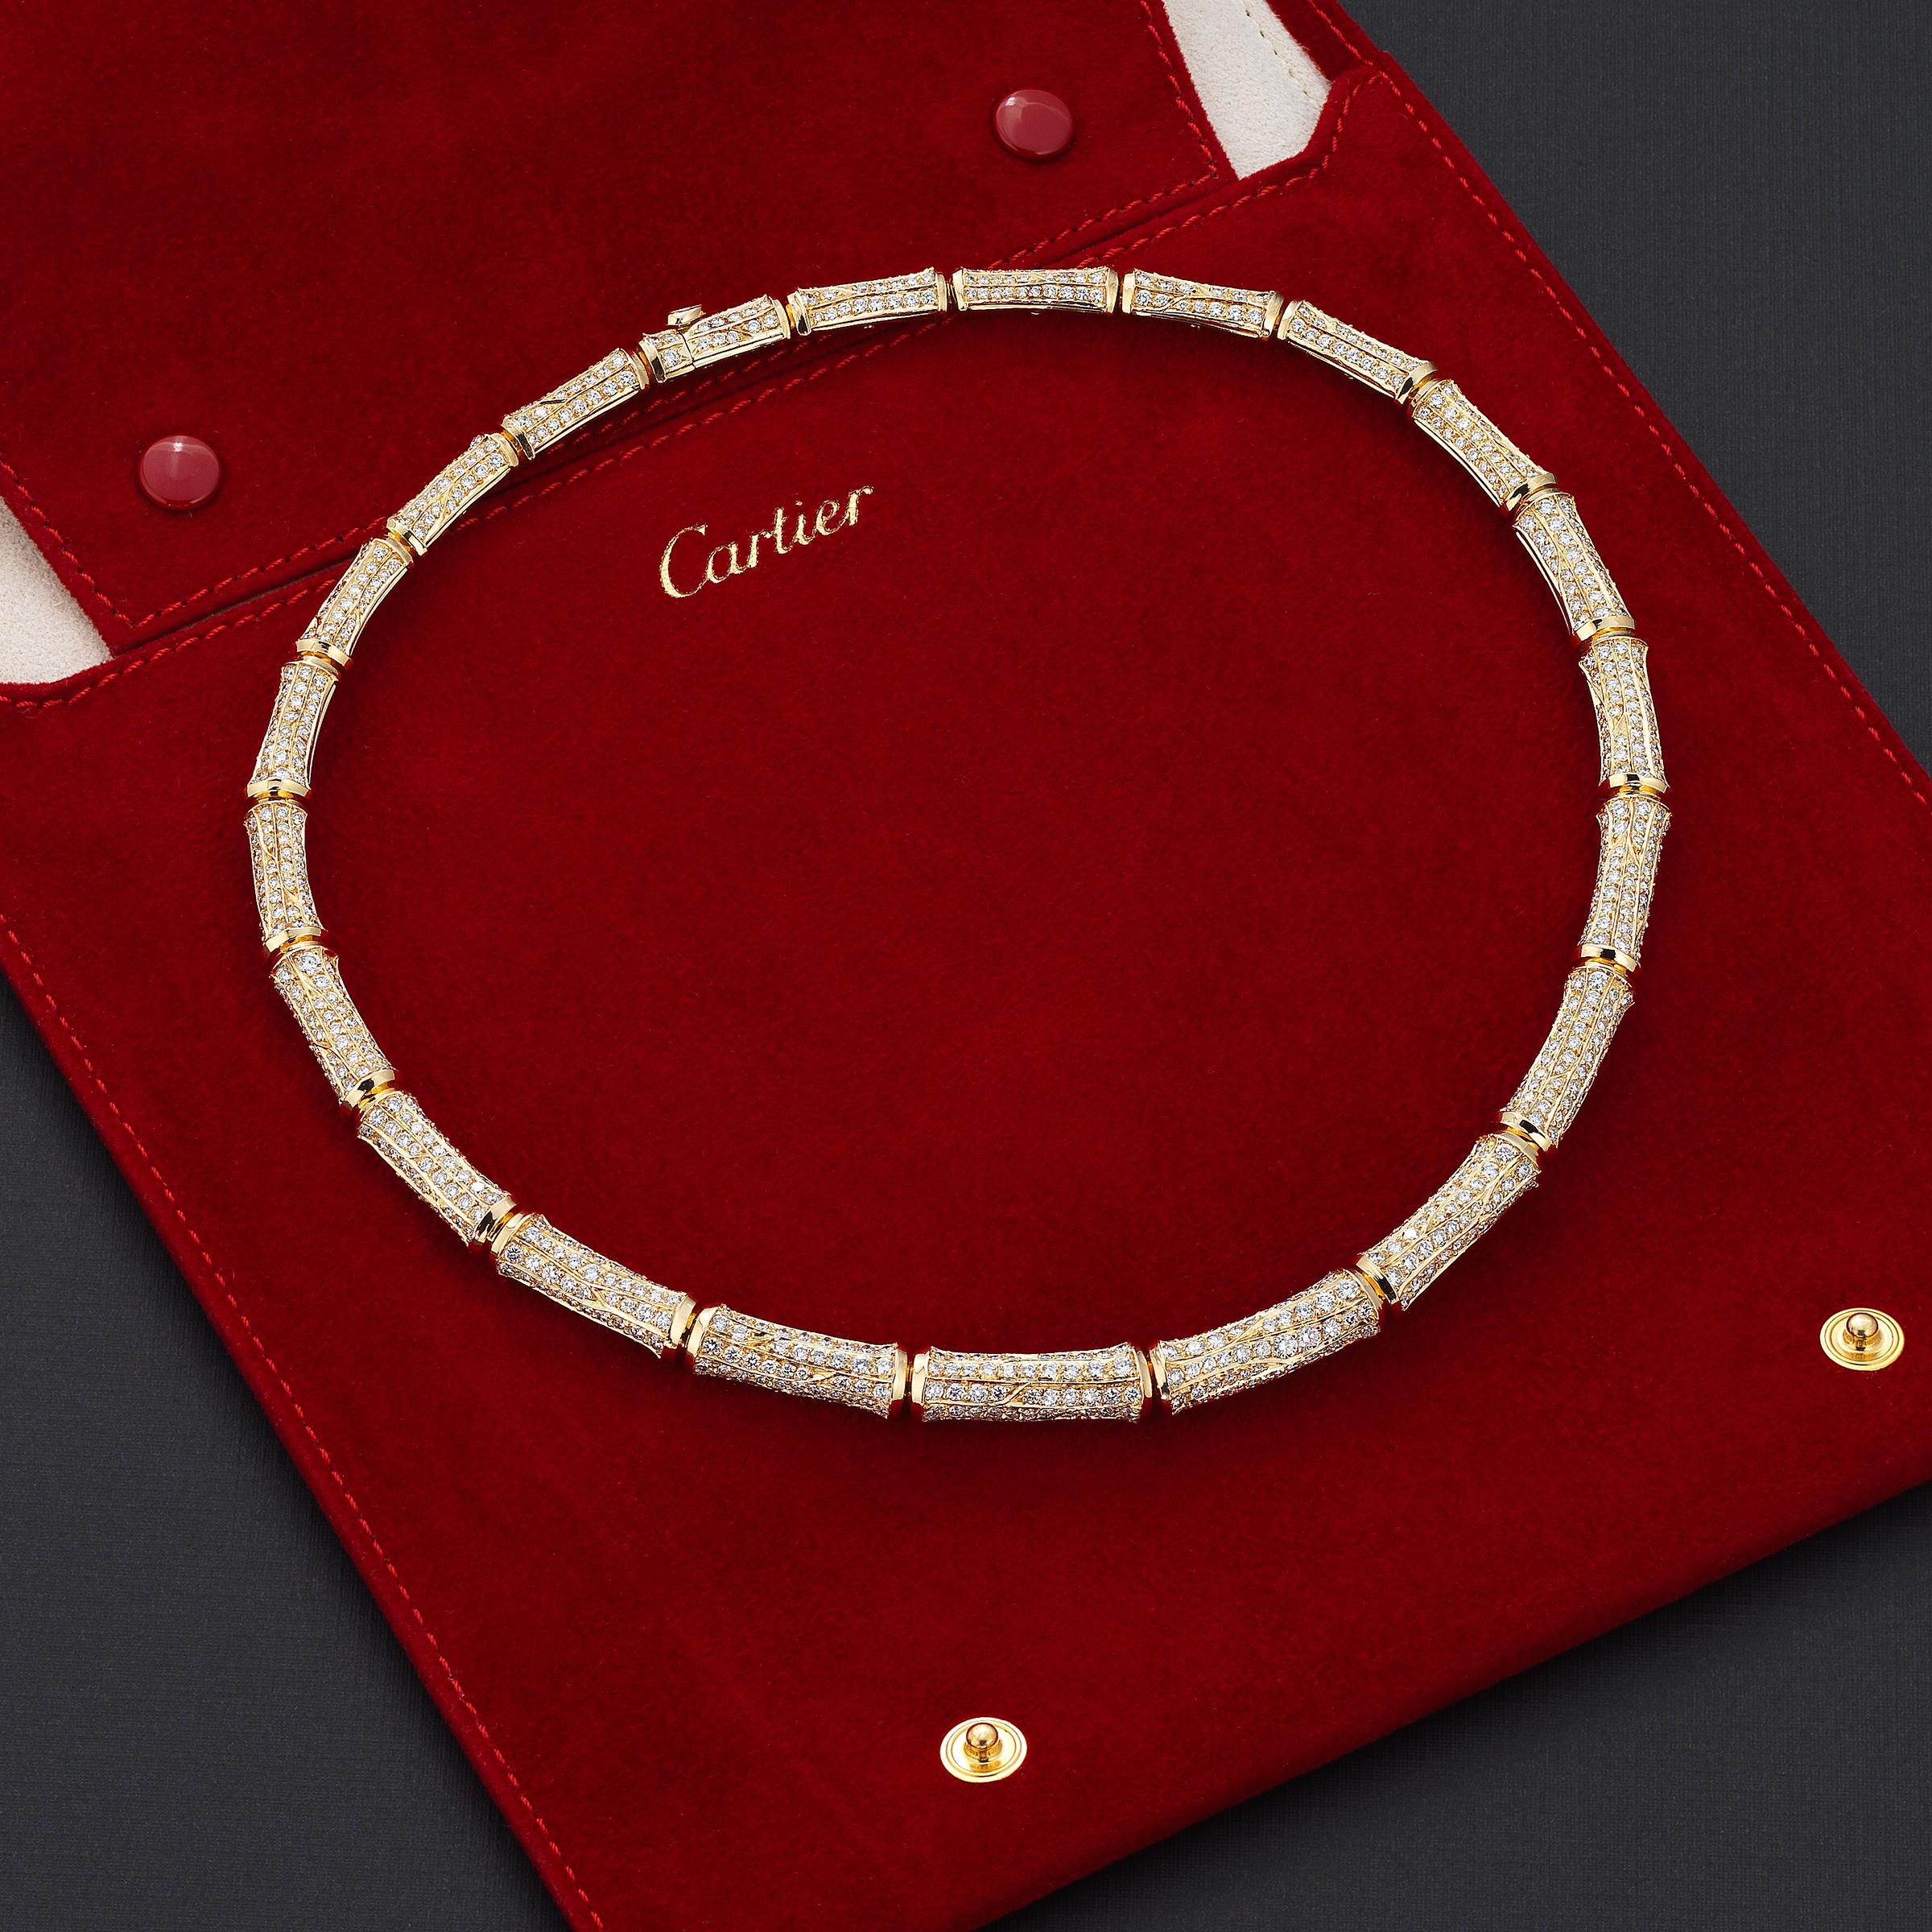 Dazzling vintage Cartier Bamboo necklace showcasing approximately 20 carats of fine-white brilliant round diamonds impeccably set in lustrous 18 karat yellow gold. The necklace rests effortlessly and comfortably on the collar, allowing for full